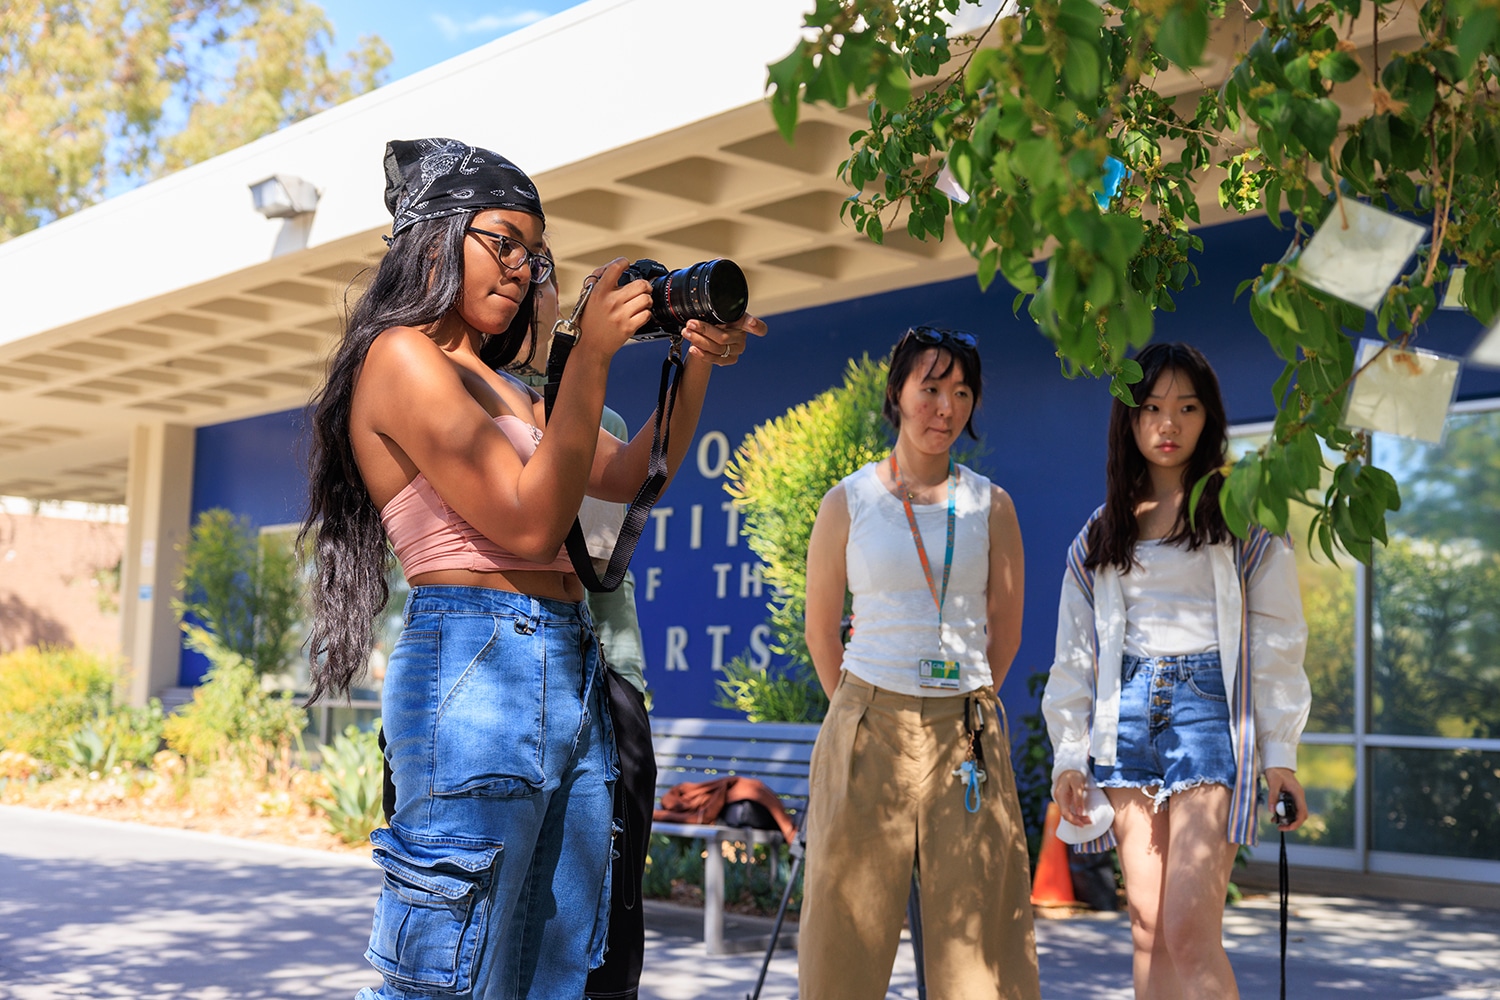 Student standing in front of Blue Wall with long hair and black bandana holds camera as two other students look in camera's direction